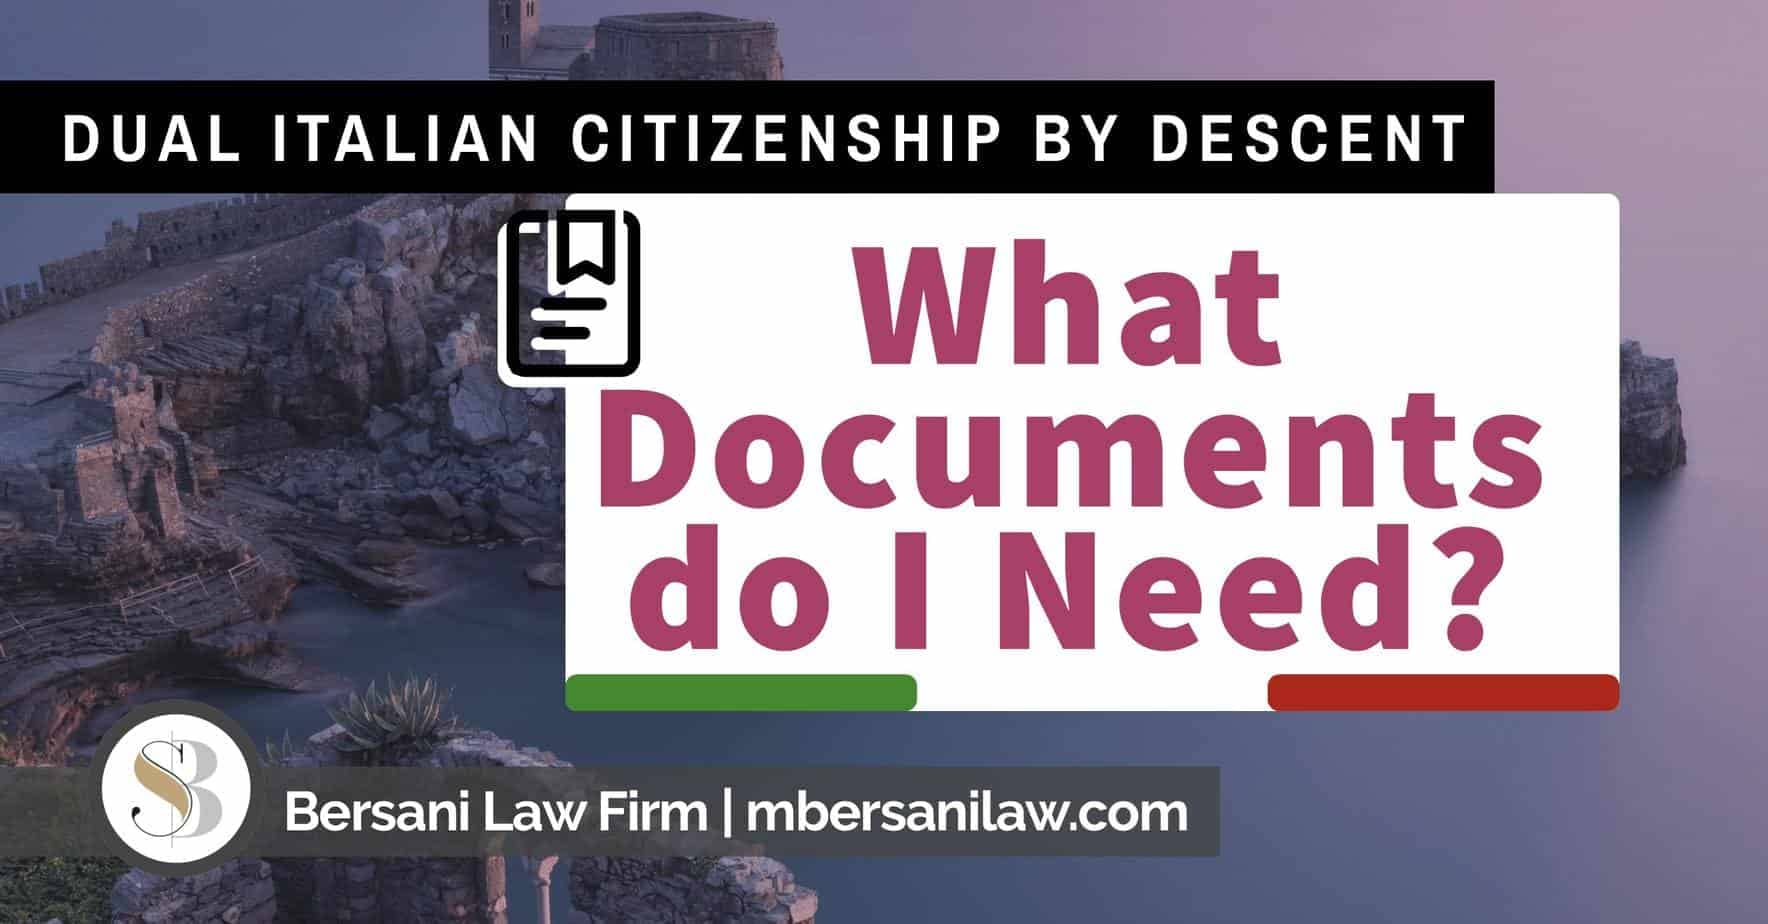 What documents do I need for Dual Italian Citizenship? [2021 *UPDATED*]